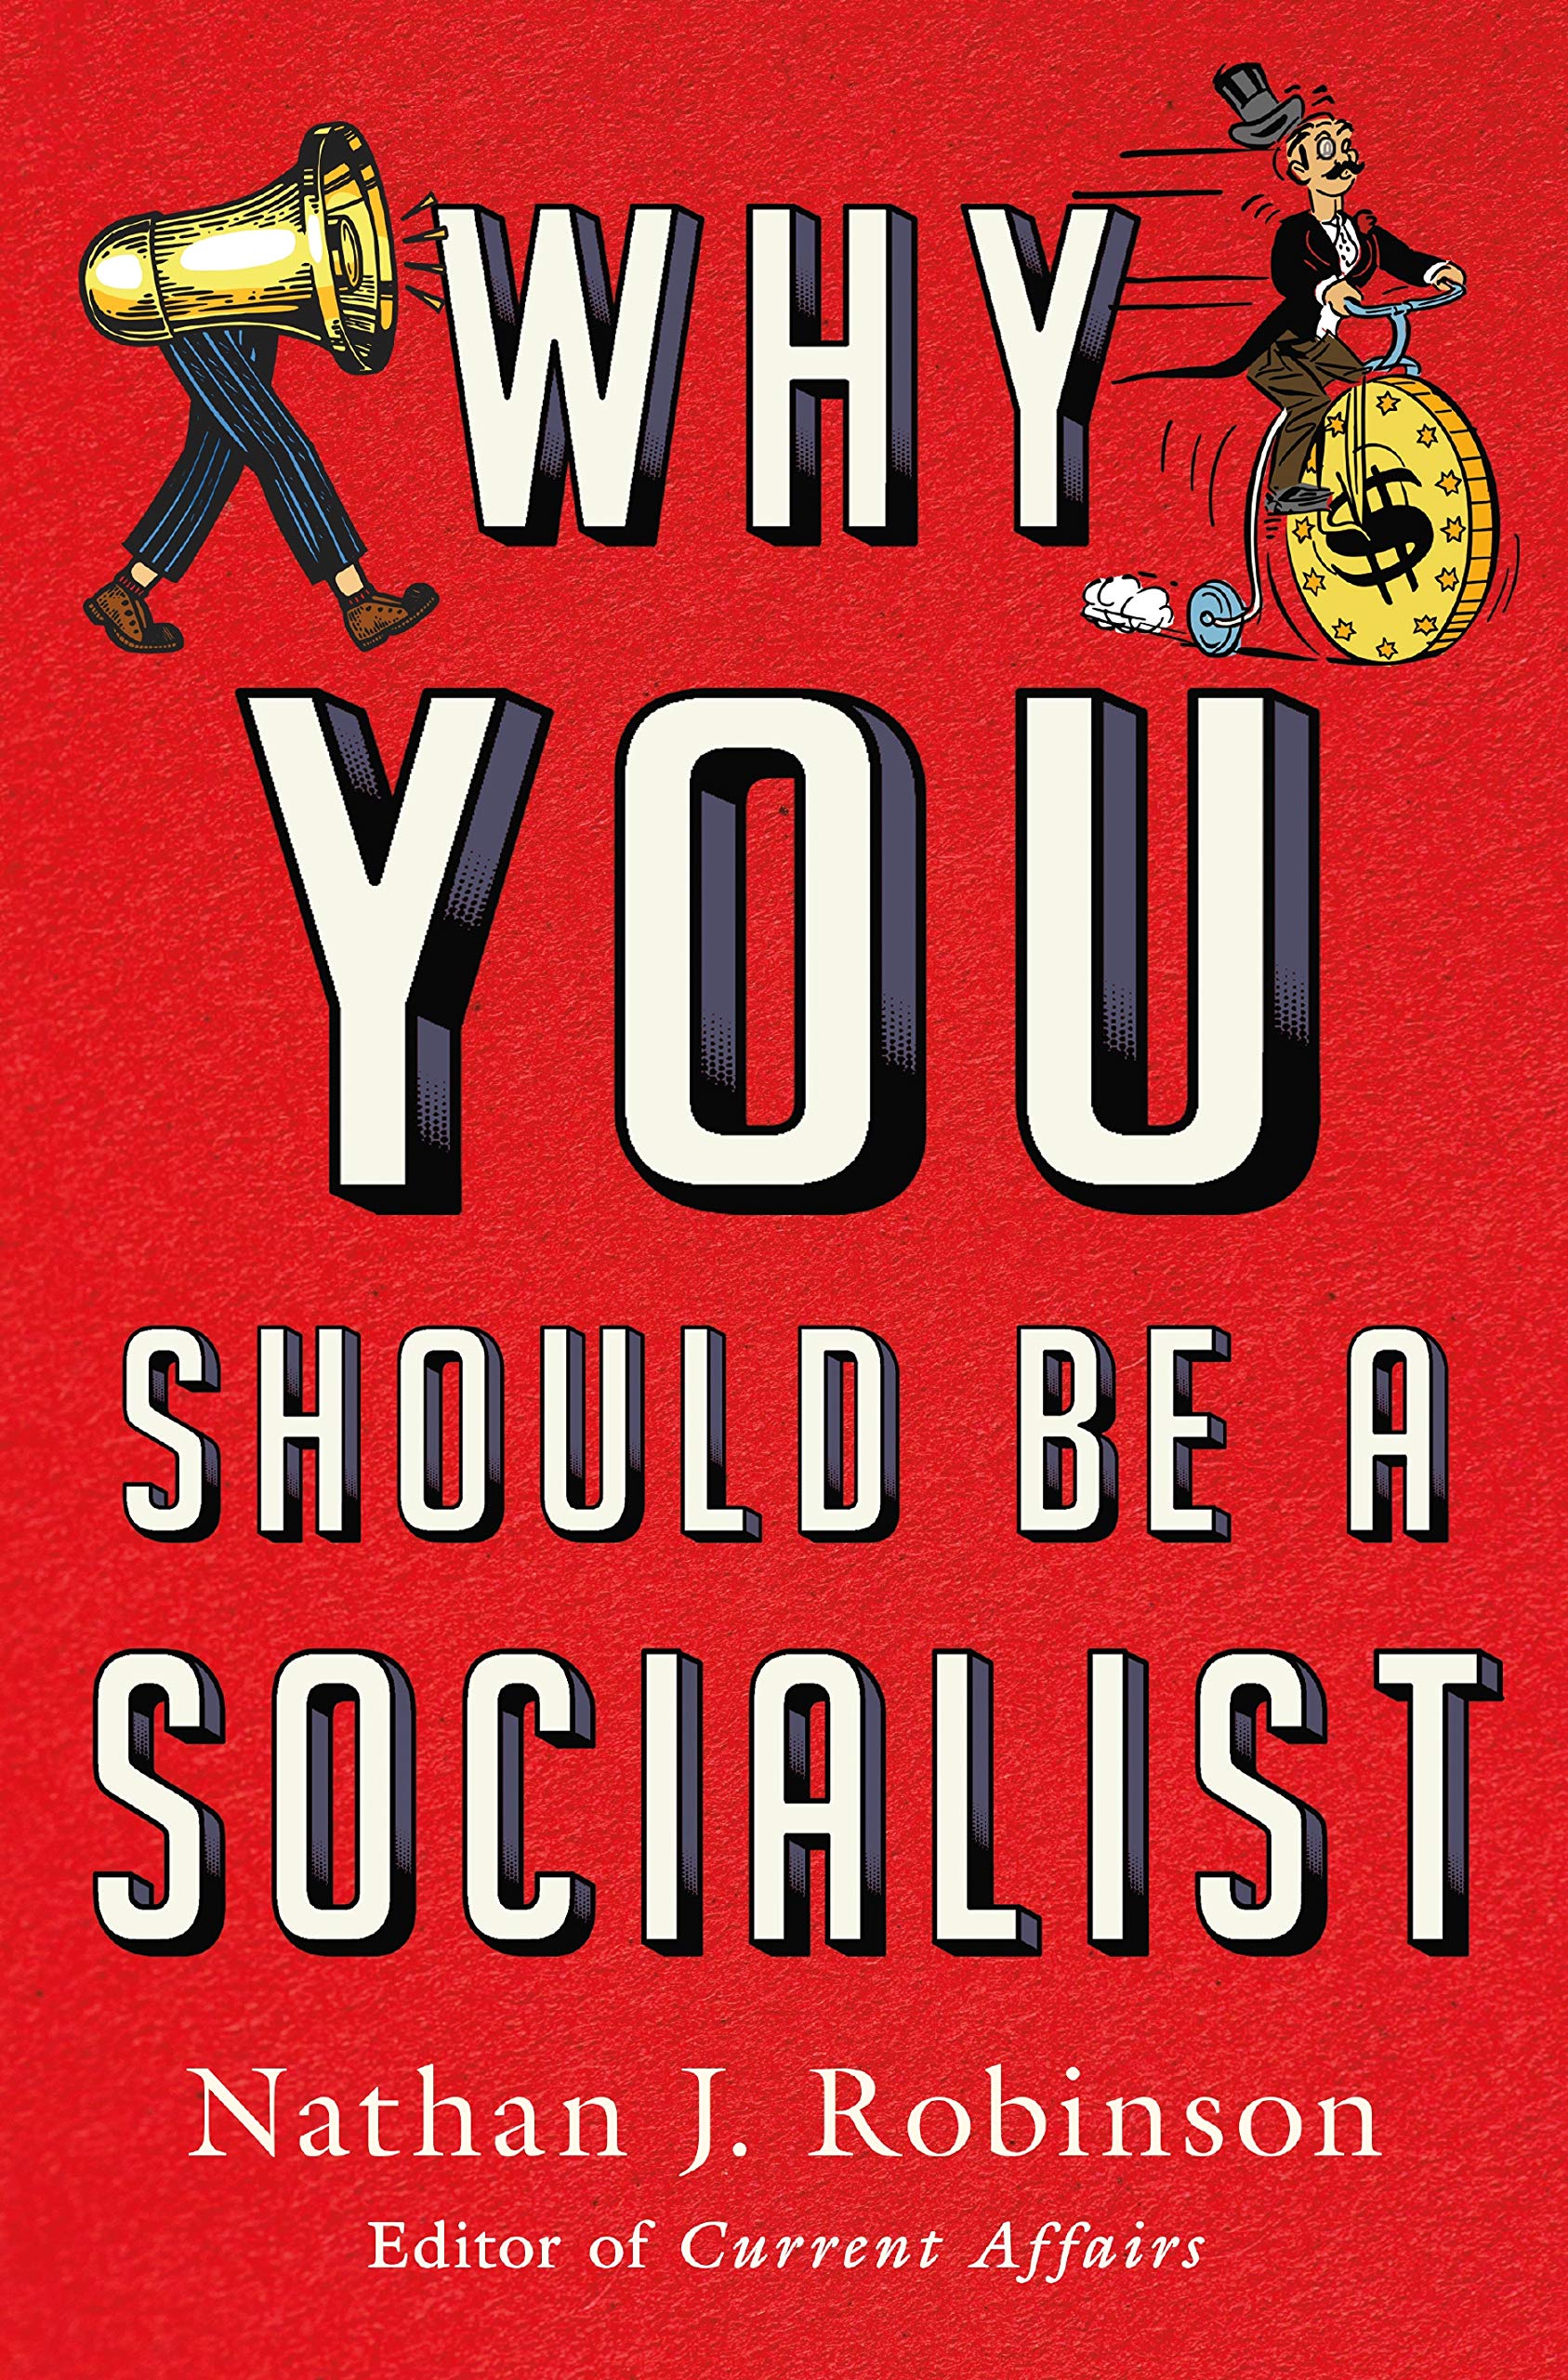 The cover of Why You Should Be a Socialist